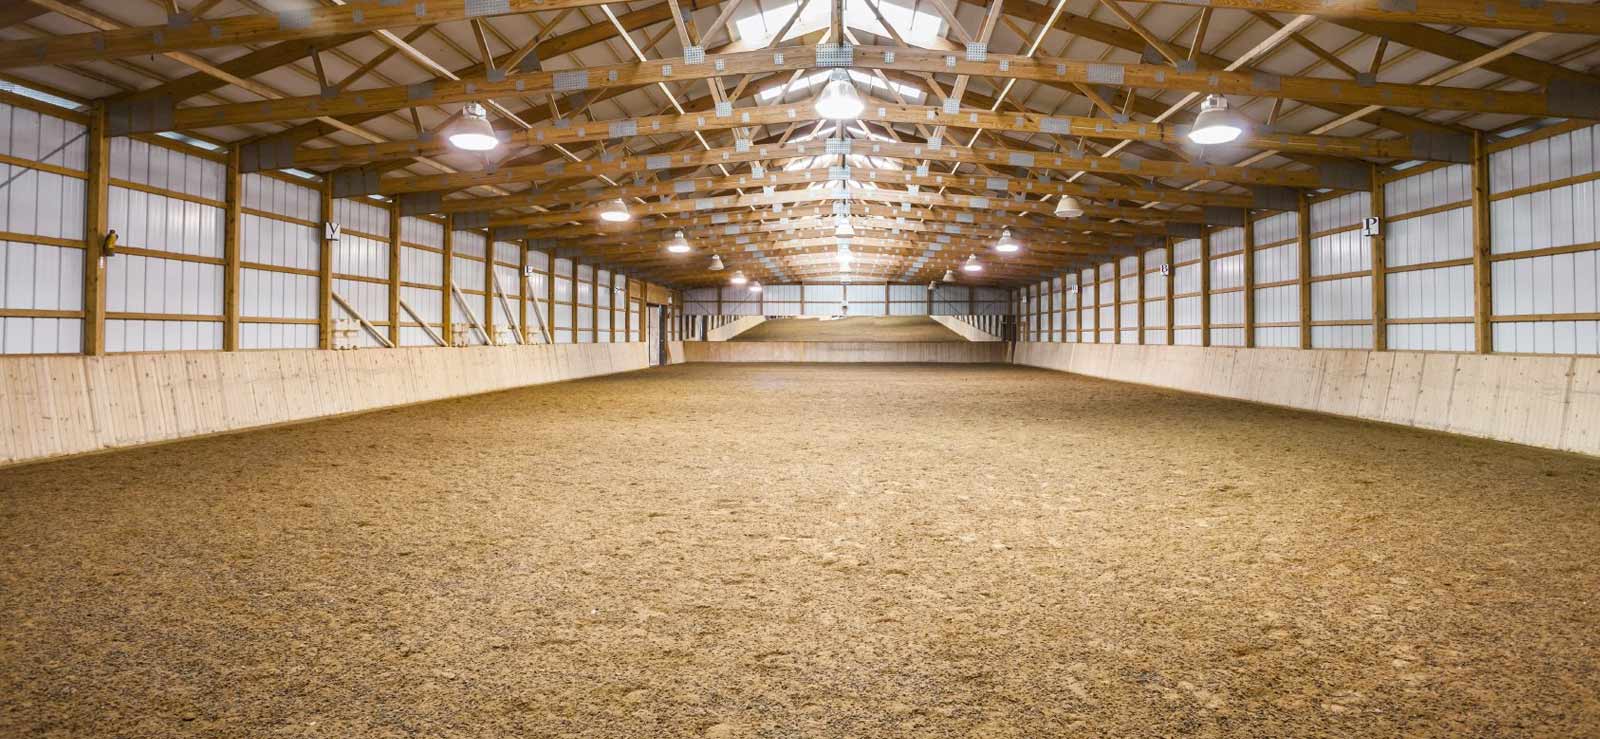 Riding Arenas (Menages) and Gallops | Robinson Plant